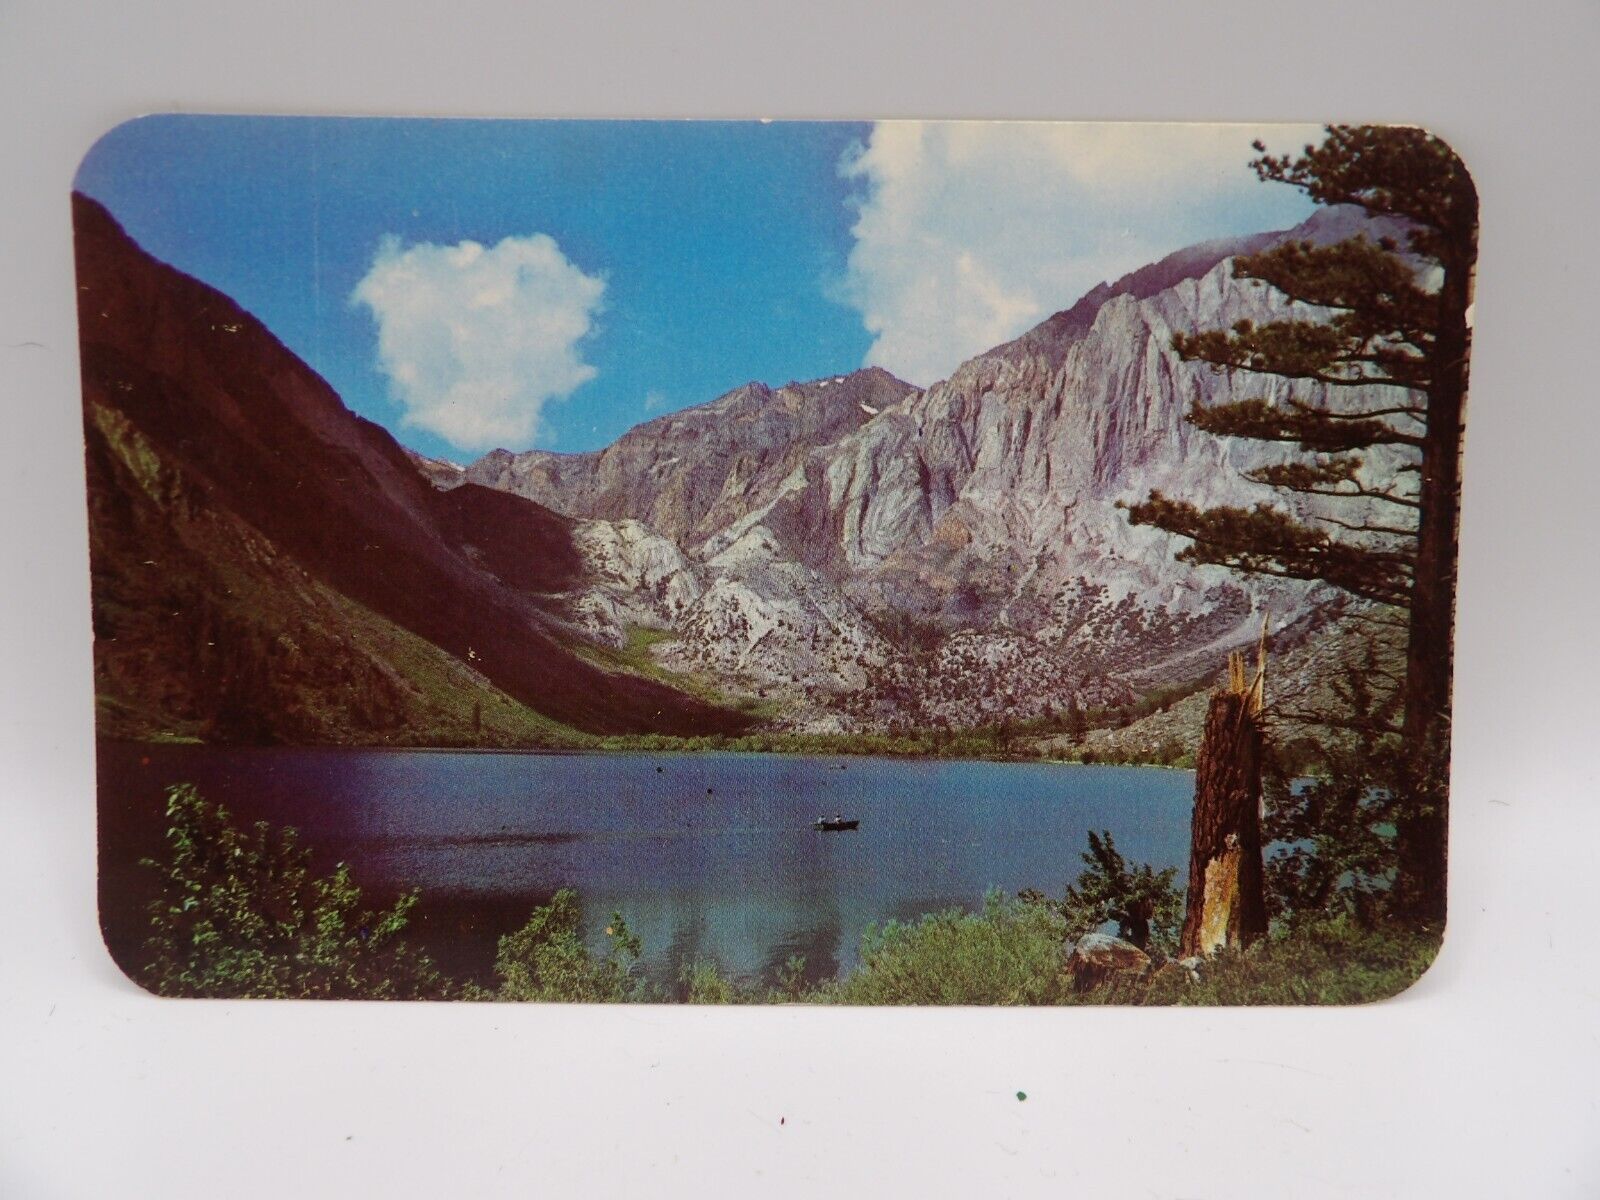 Vintage Postcard Convict Lake, Inyo National Forest, California